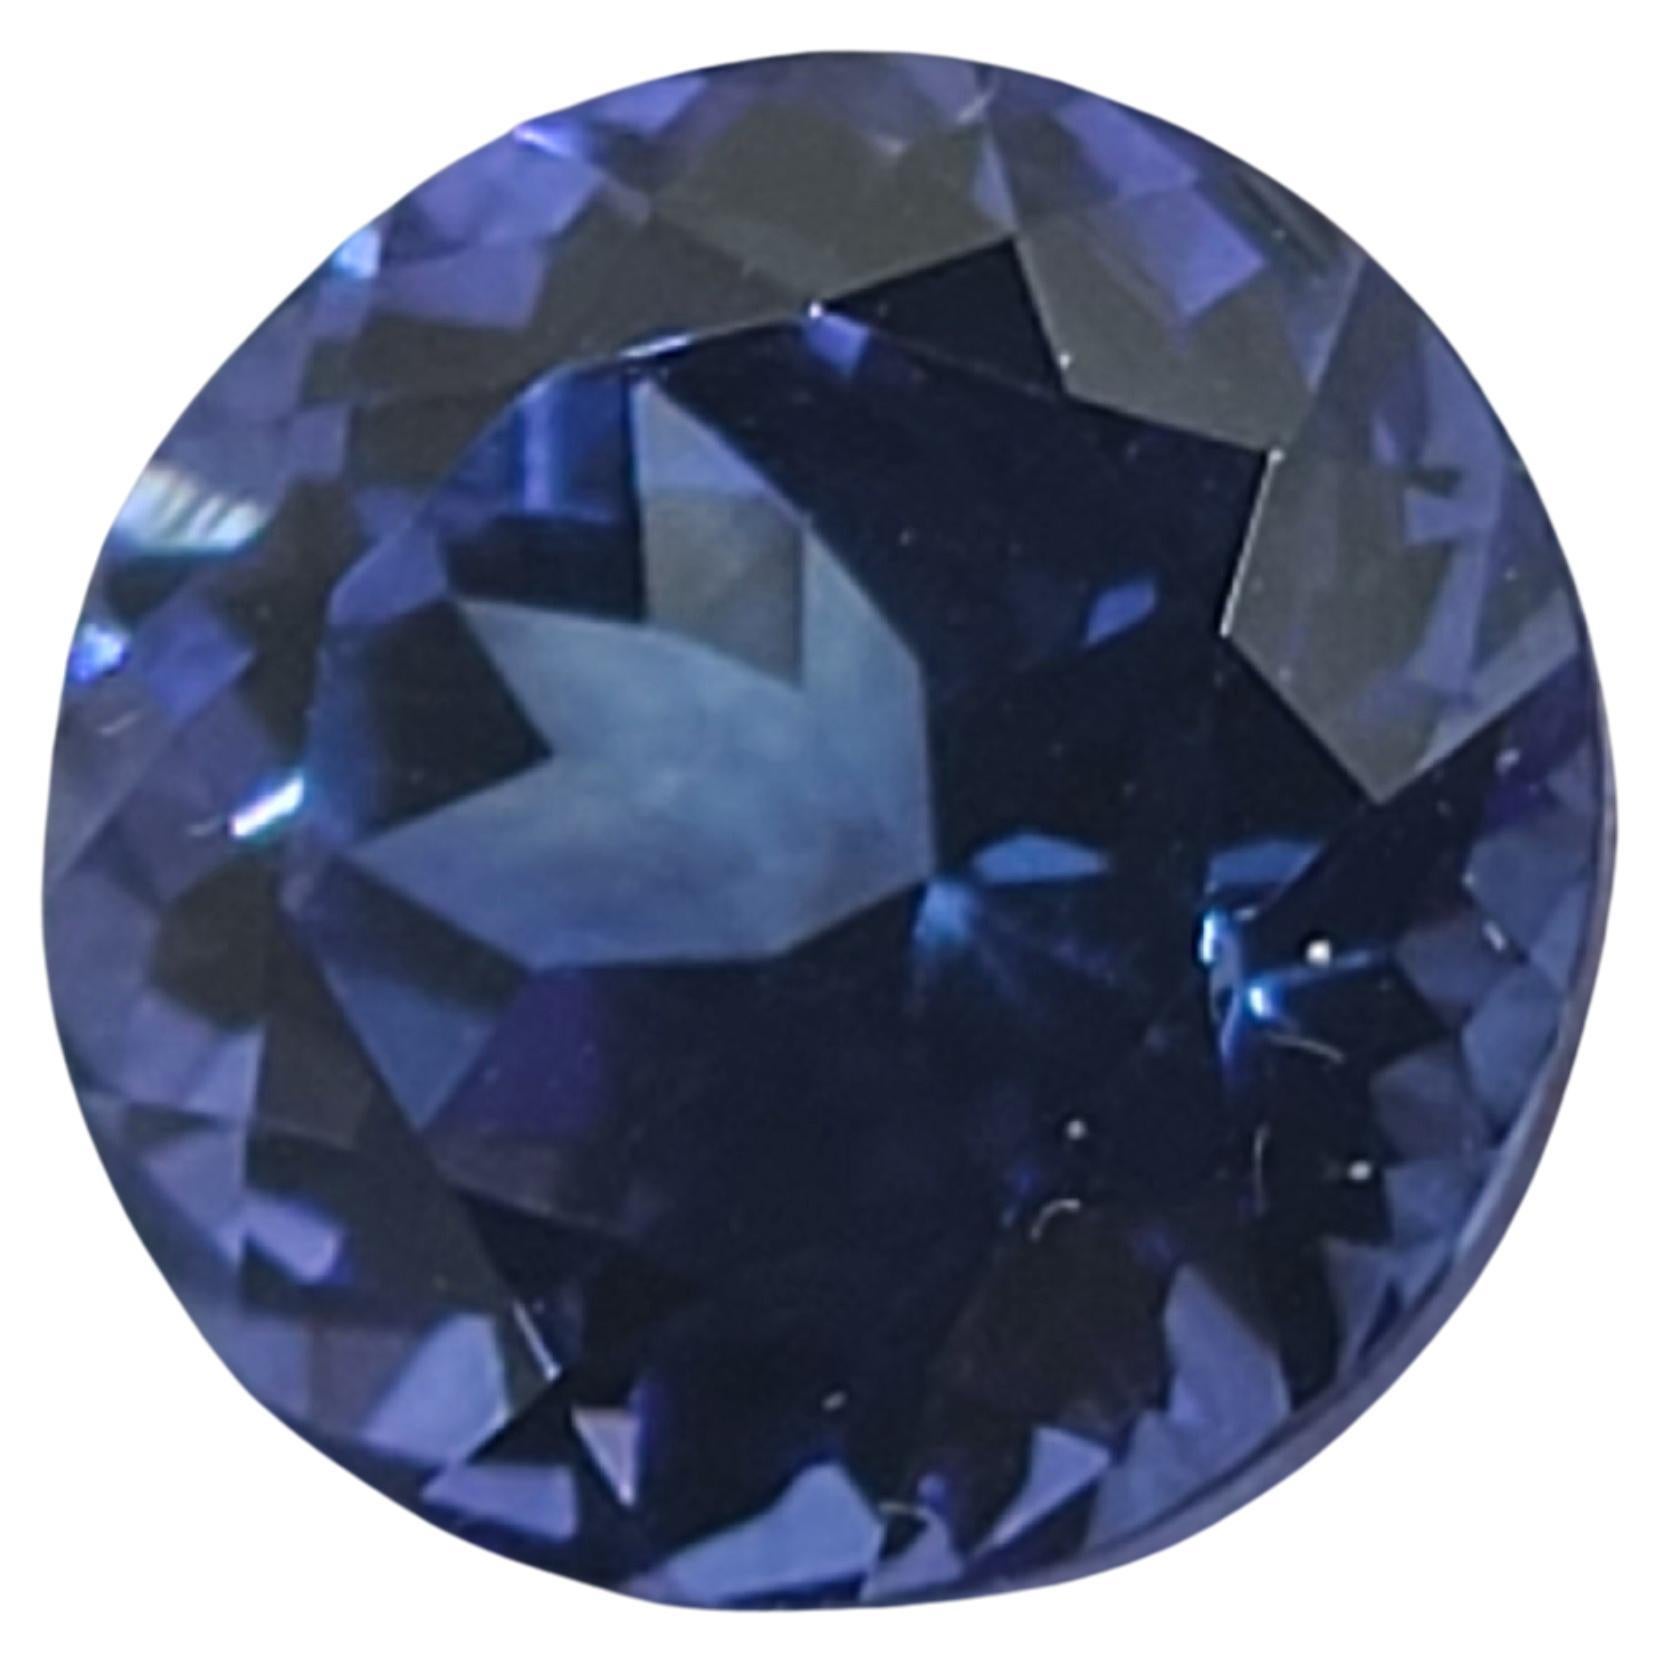 4 Carat Tanzanite 9mm Round Faceted Cut - Single Loose Stone For Sale